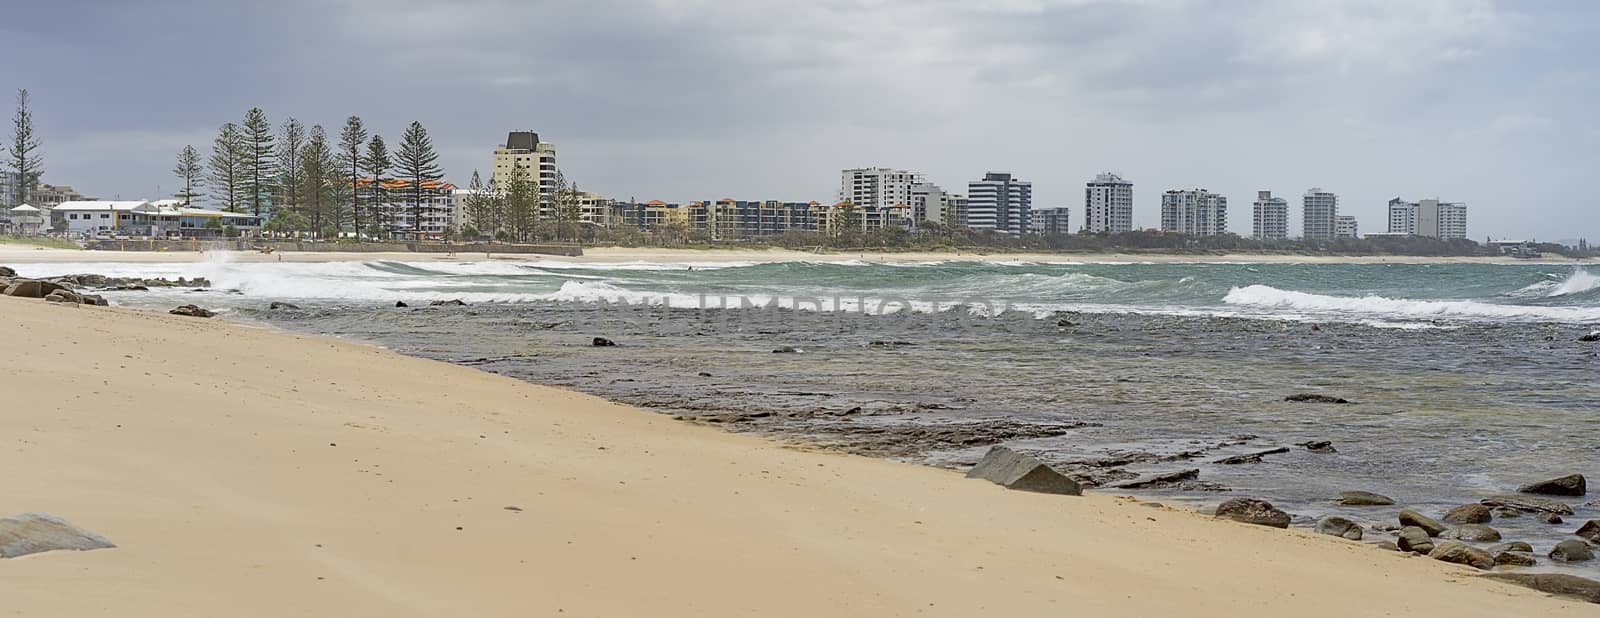 Panorama of Sunshine Coast foreshore at Alexandra Headlands Mooloolaba with surf, sand, rocky seafront and cloudy sky